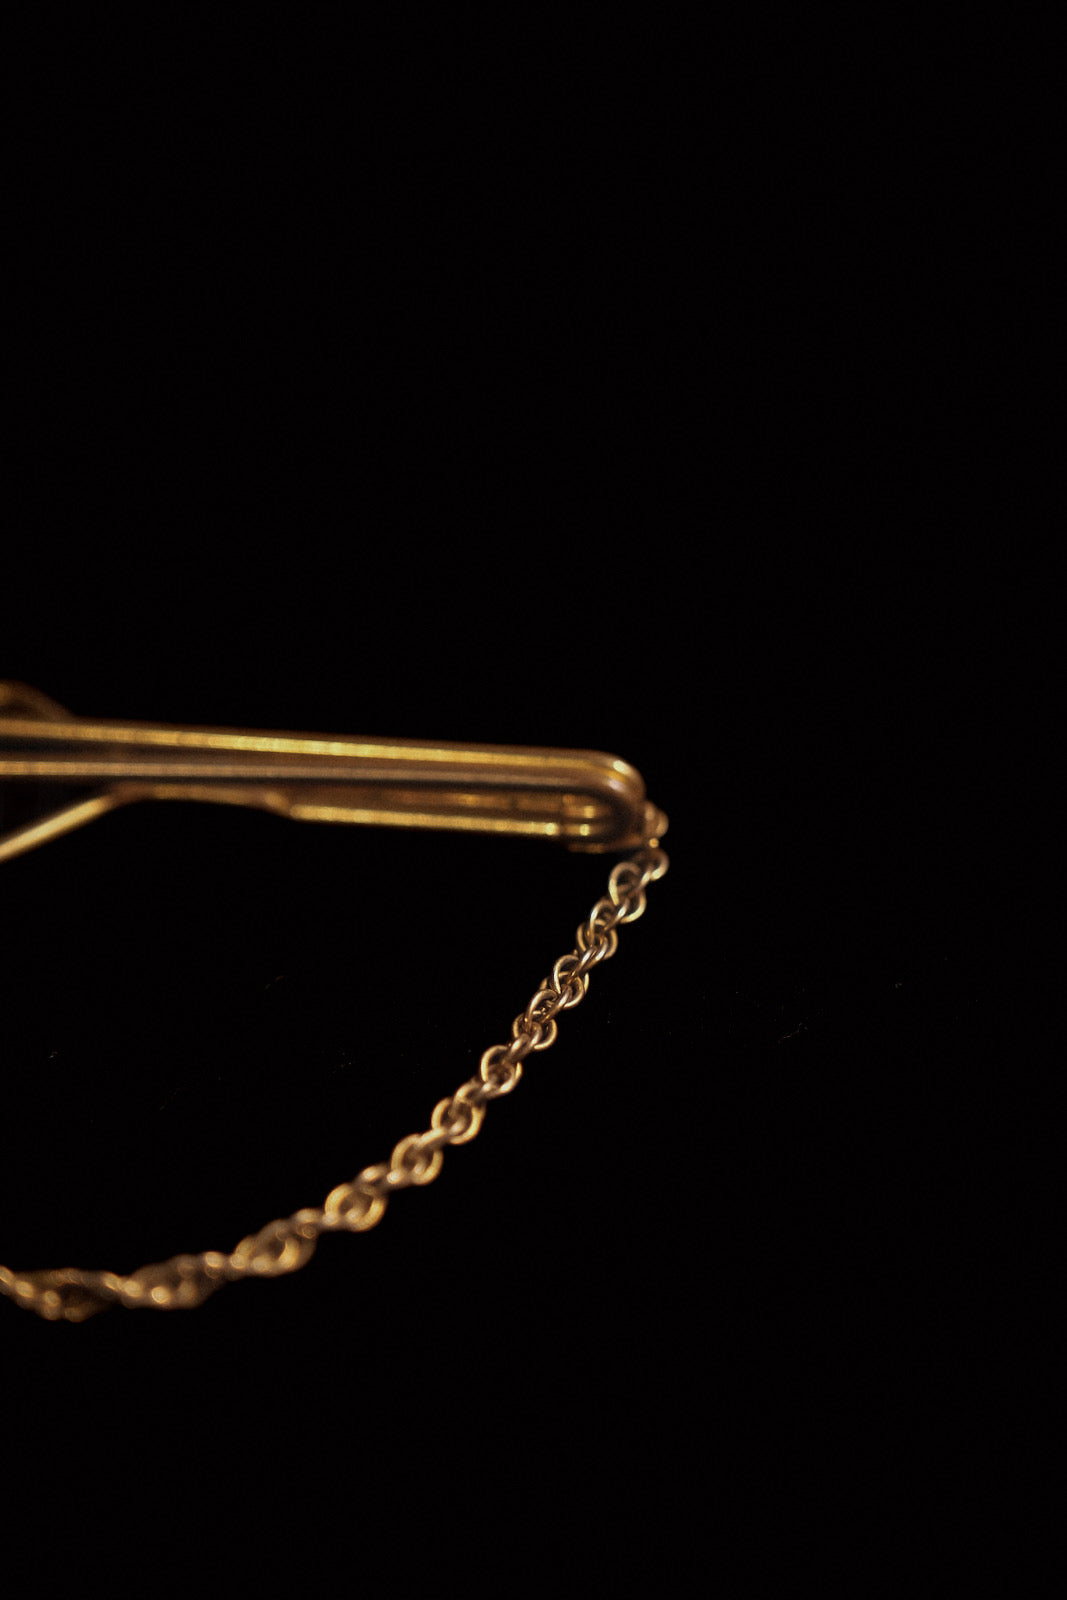 1930s Tie Bar Featuring a Twist Chain By Swank No. 1865995